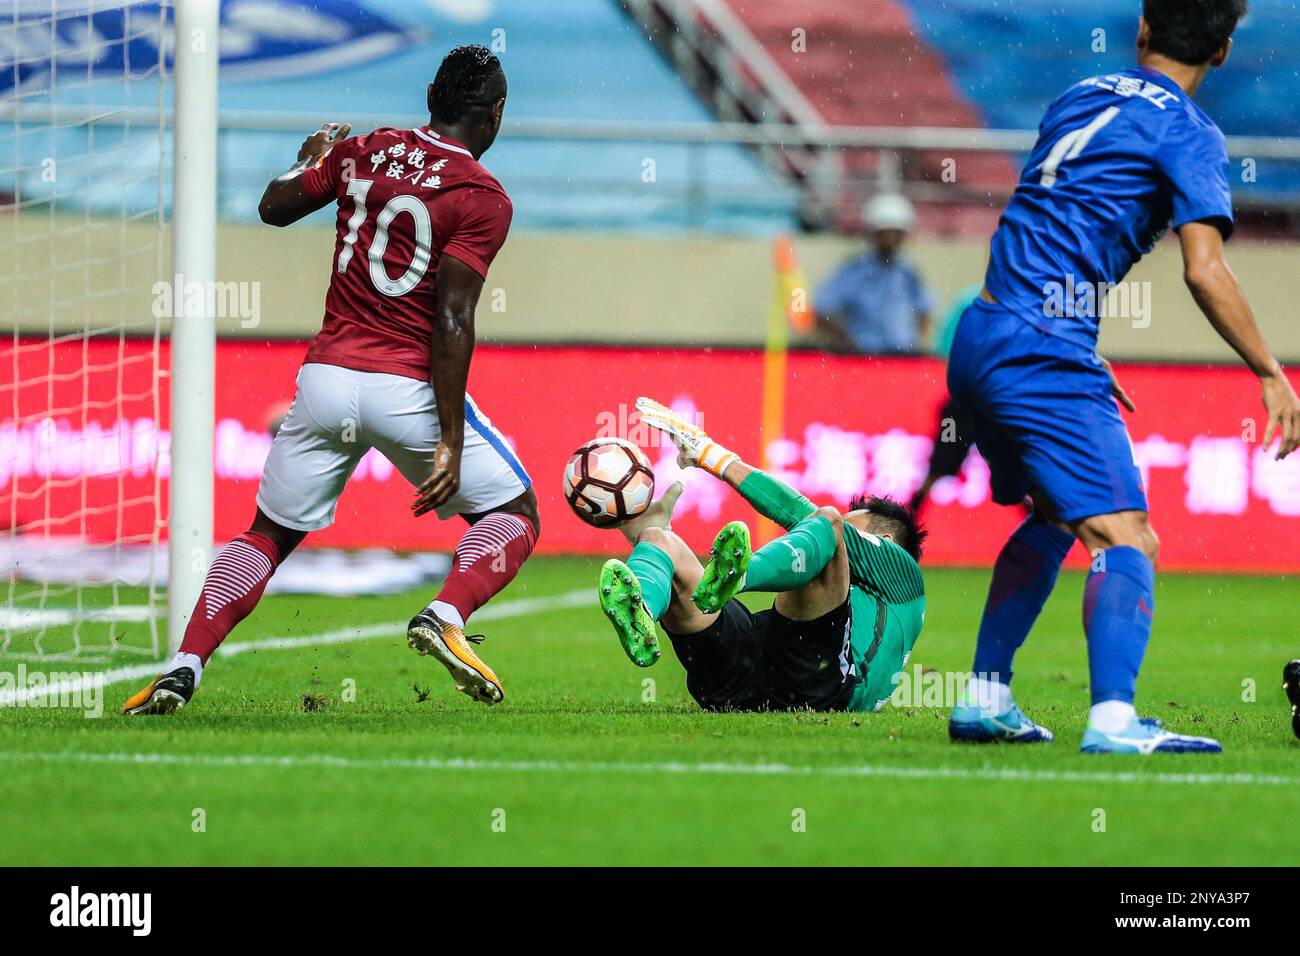 Cameroonian football player Christian Bassogog, left, of Henan Jianye, shoots against Shanghai Greenland Shenhua in their 24th round match during the 2017 Chinese Football Association Super League (CSL) in Shanghai, China, 10 September 2017.(Imaginechina via AP Images) Stock Photo